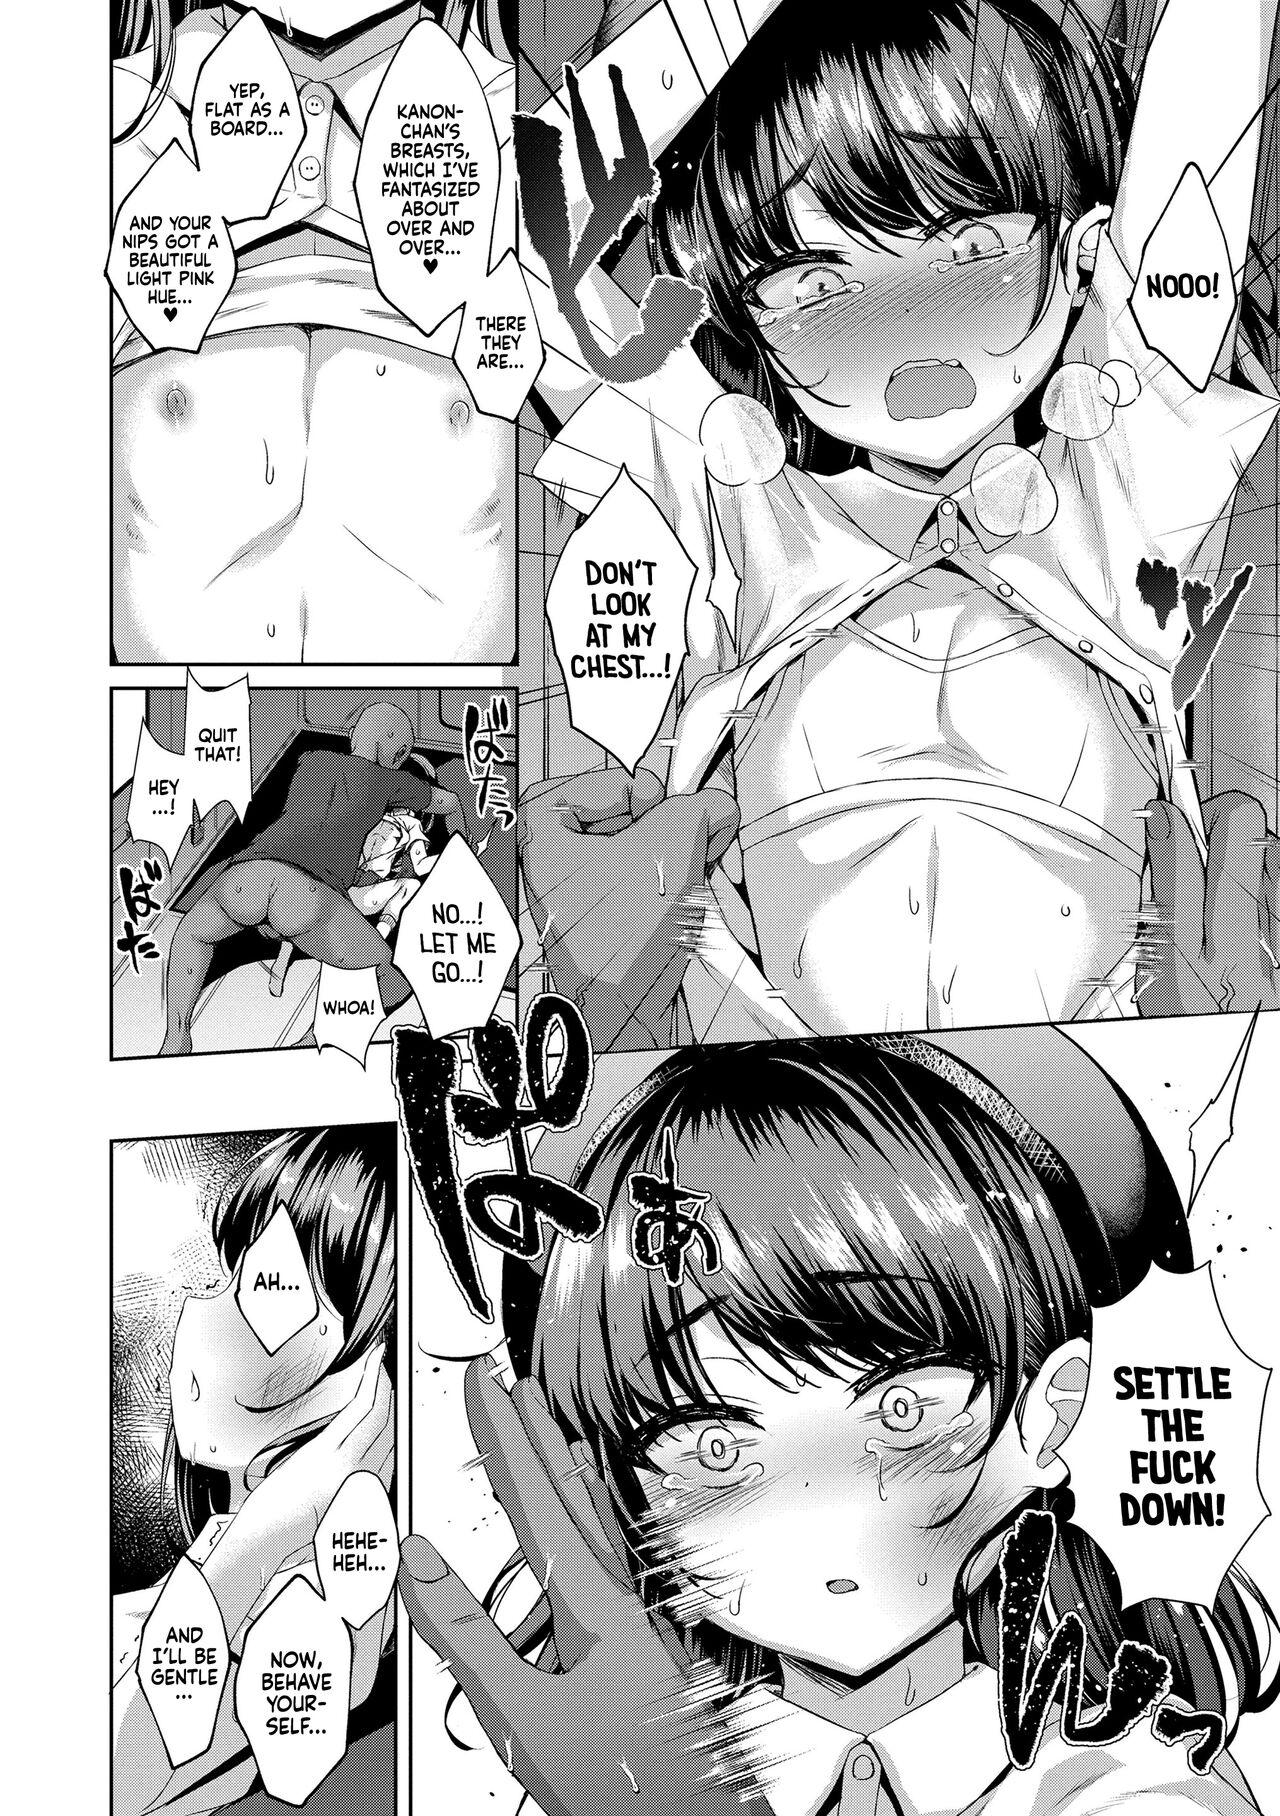 Cheating Utsukushii Asa o Kimi to | A Beautiful Morning With You Rough Sex - Page 4